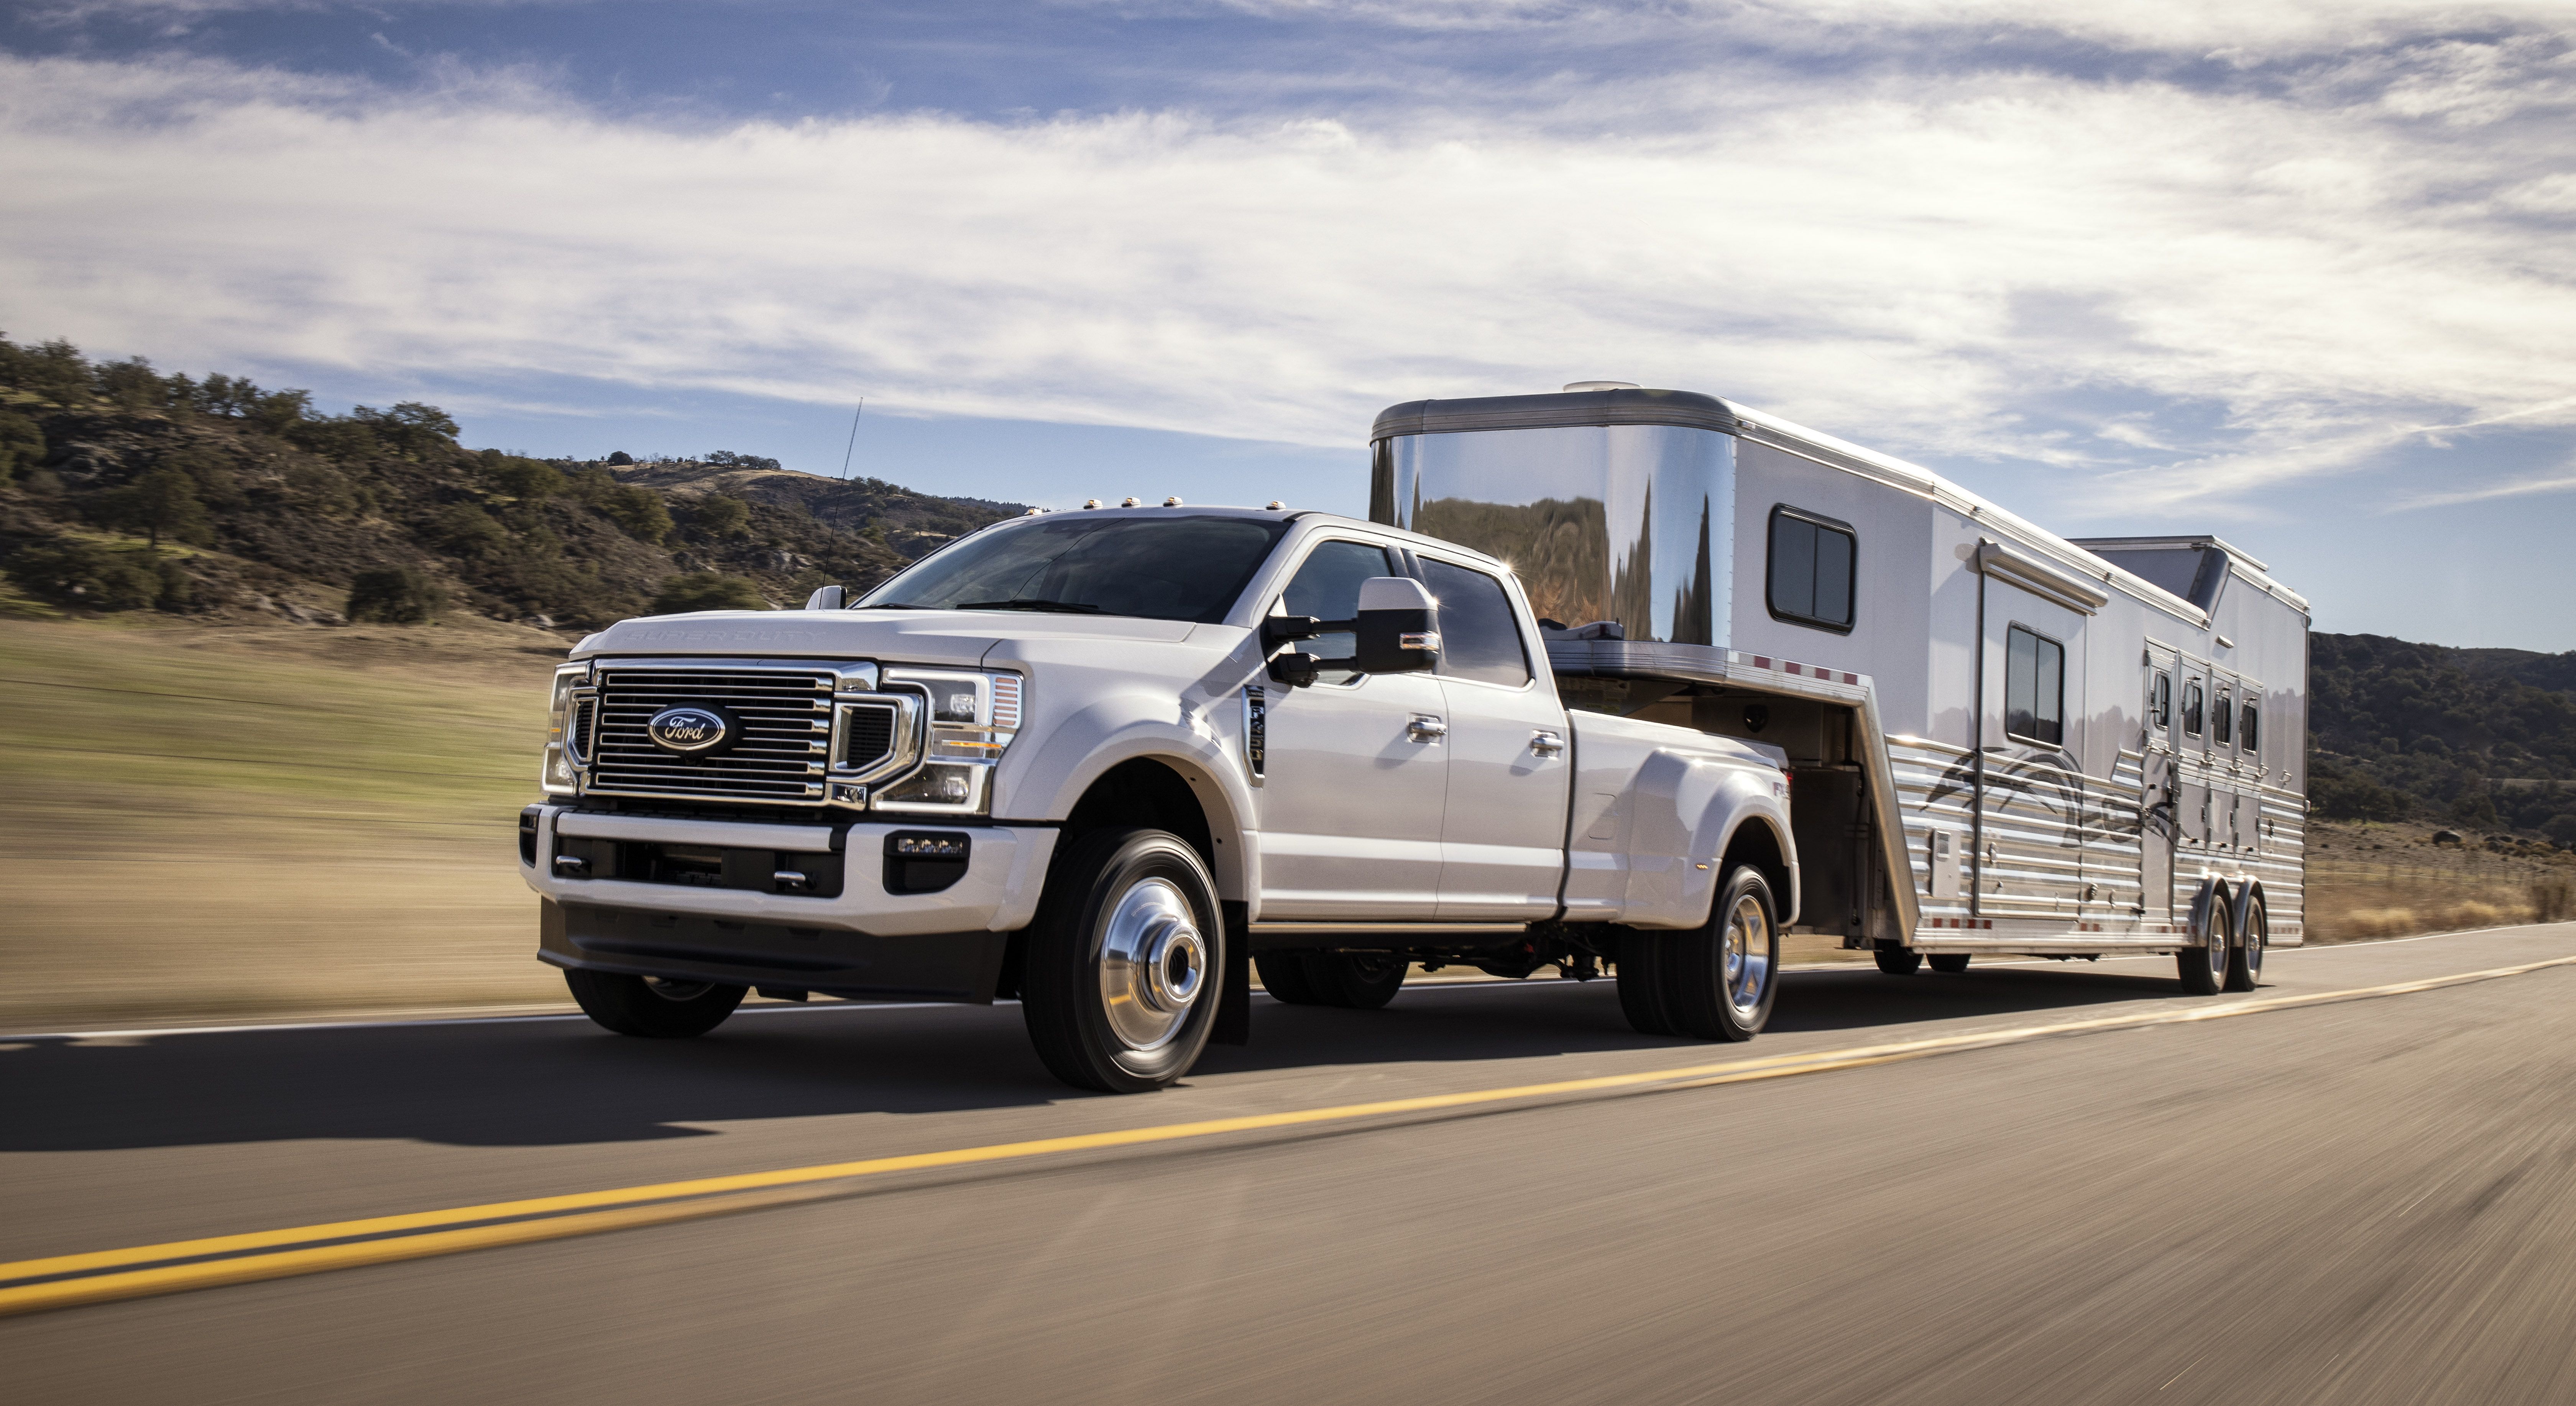 Ford F250 Diesel Towing Capacity Chart A Visual Reference of Charts